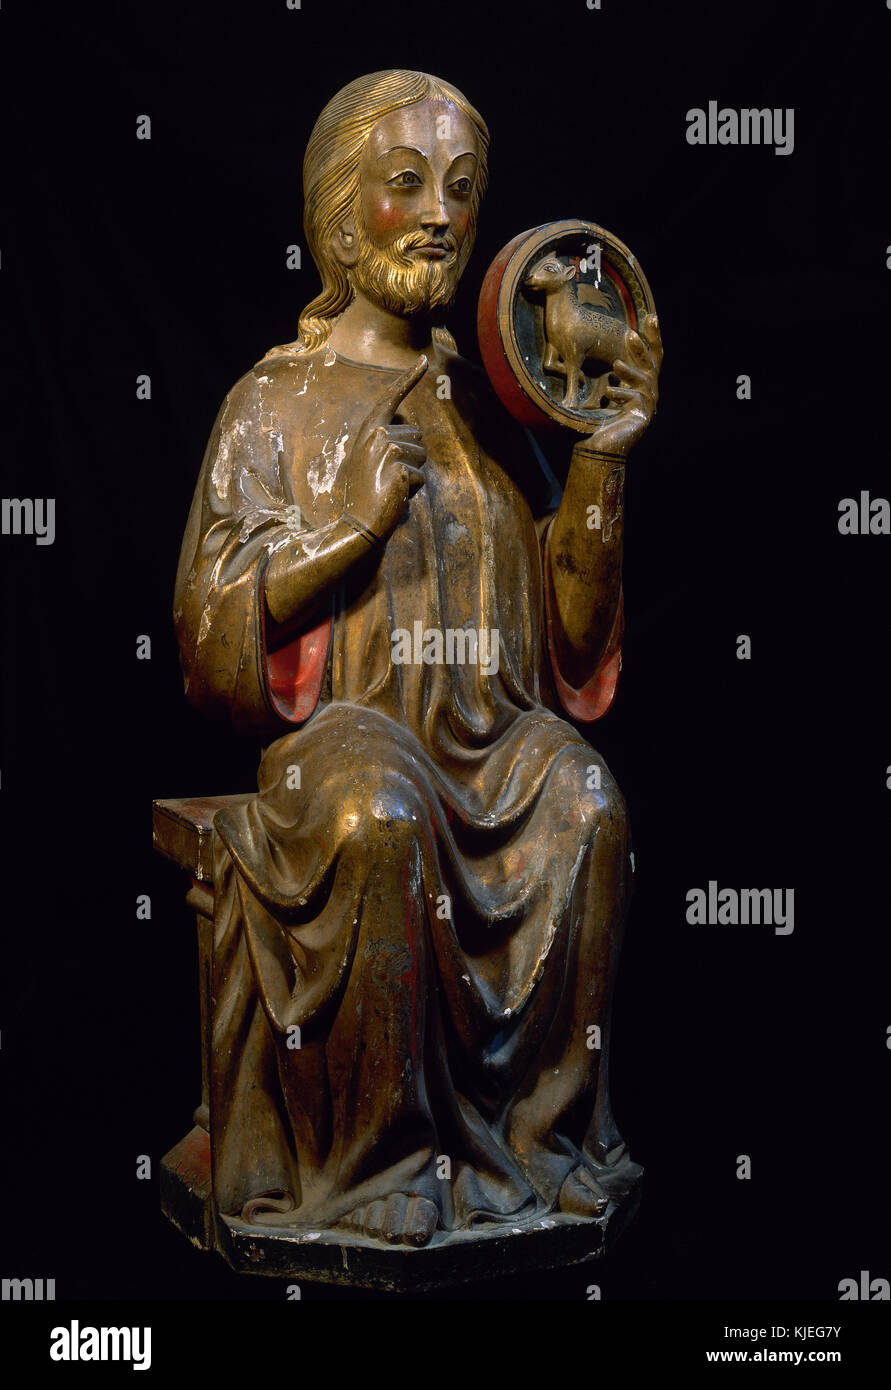 Saint John Baptist. Gothic statue. C. 1300. Possibly from Sant Joan d'Arties (Vall d'Aran, Catalonia). Coated with silver leaf and polychrome. Photo from 1989. Restored. Spain. Stock Photo